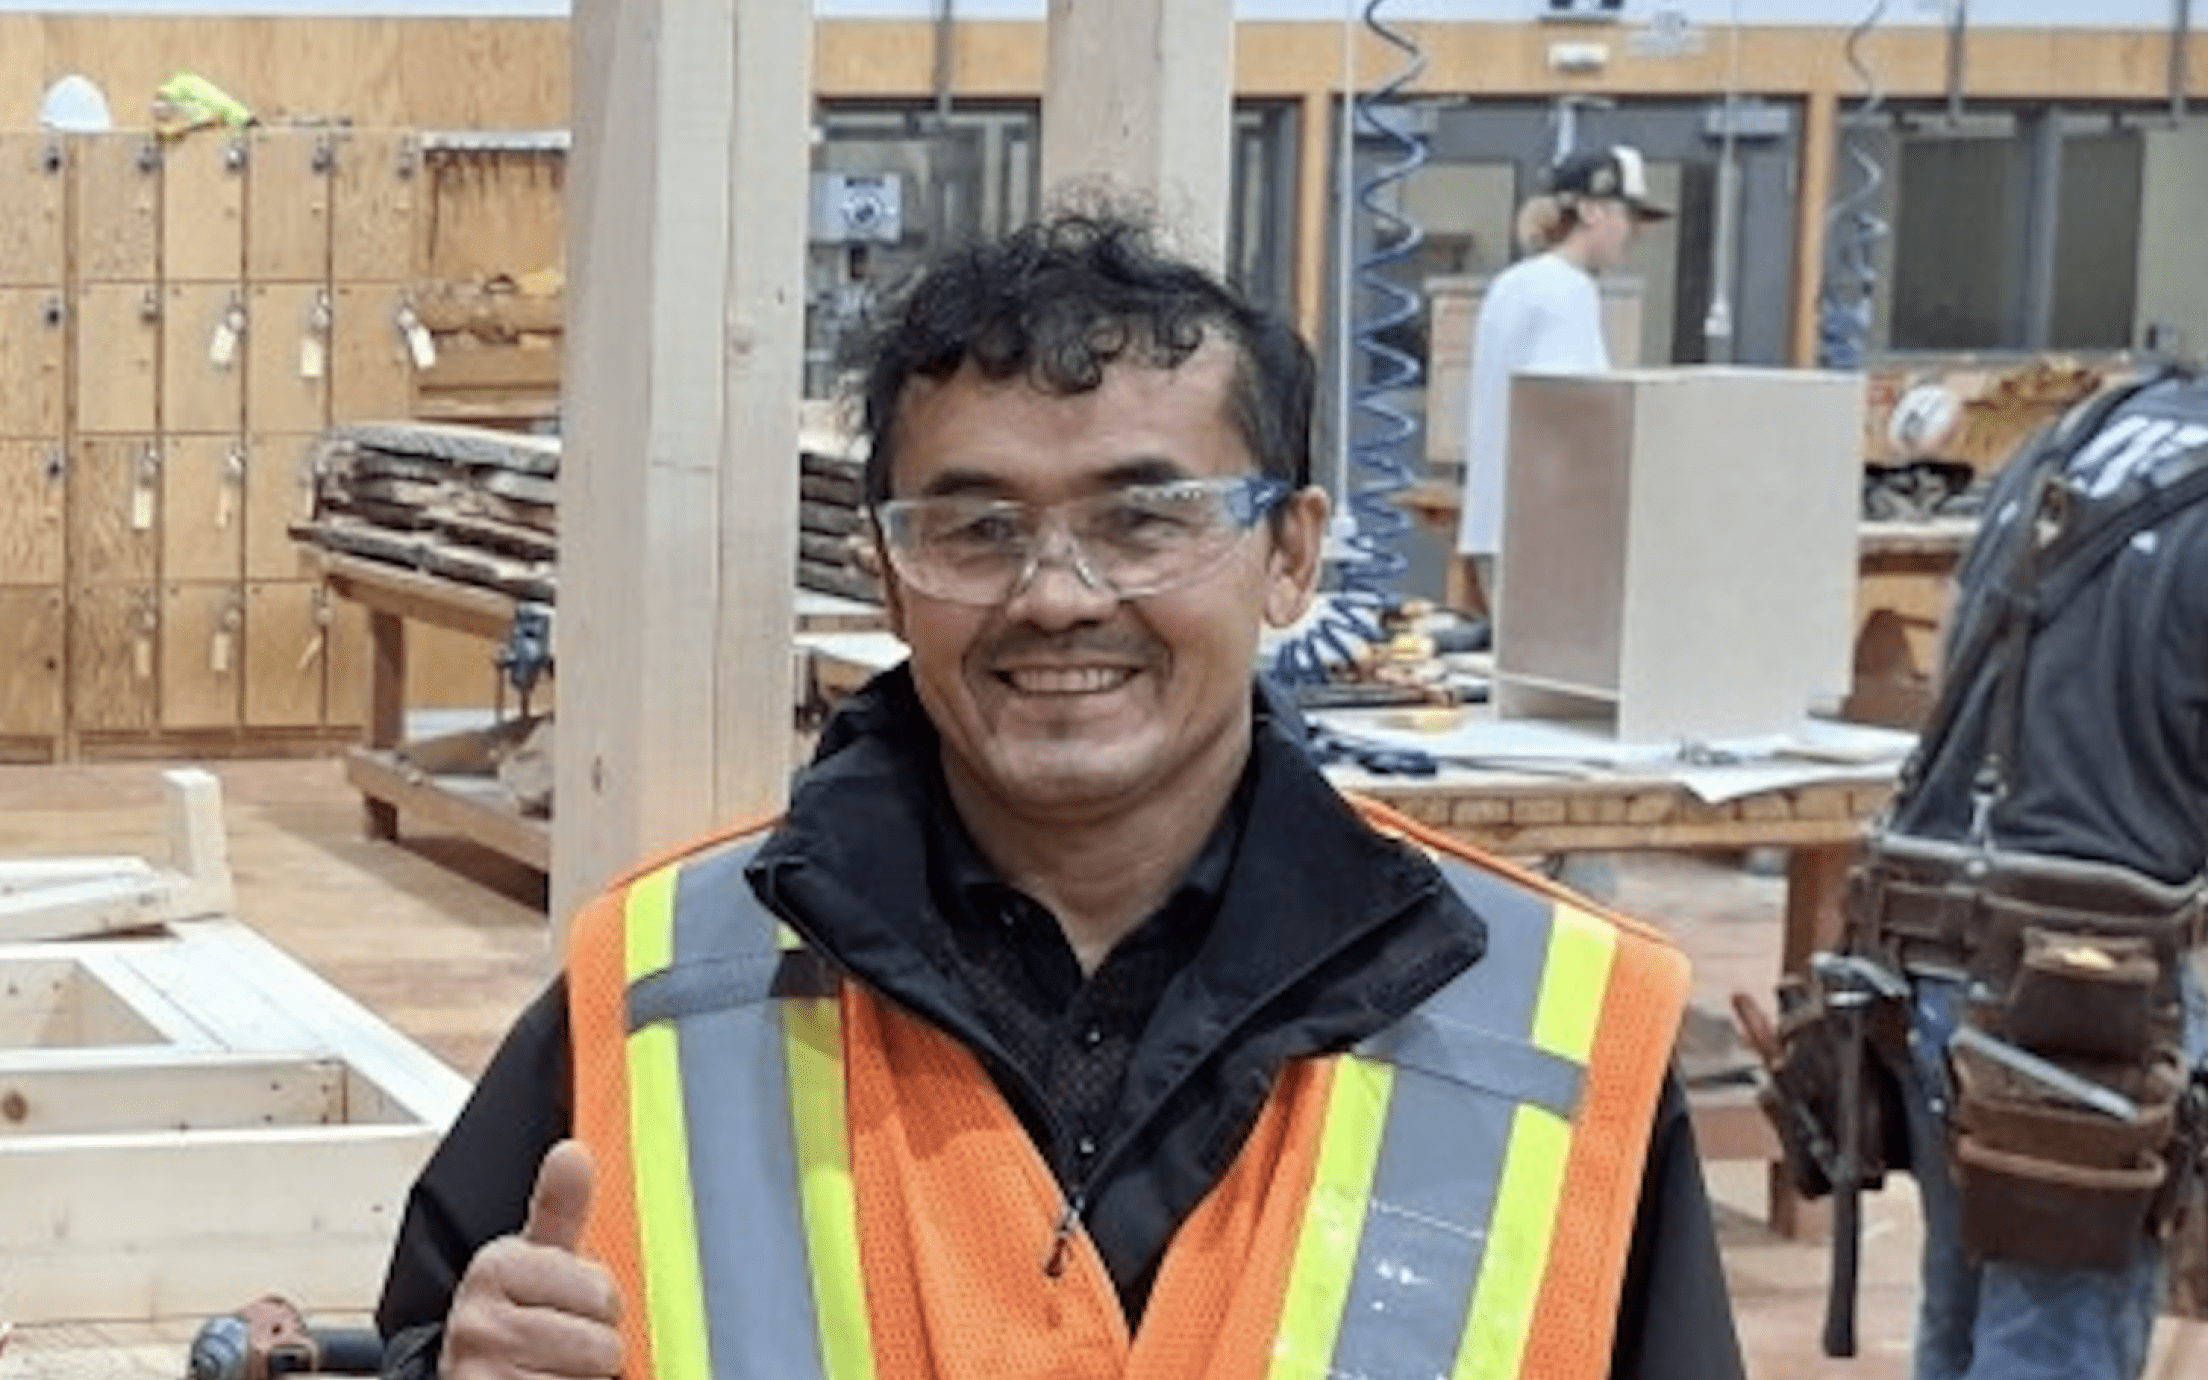 Ezat Haidary wering a reflective vests and safety goggles in the carpentry shop, giving a thumbs up and smiling at the camera.